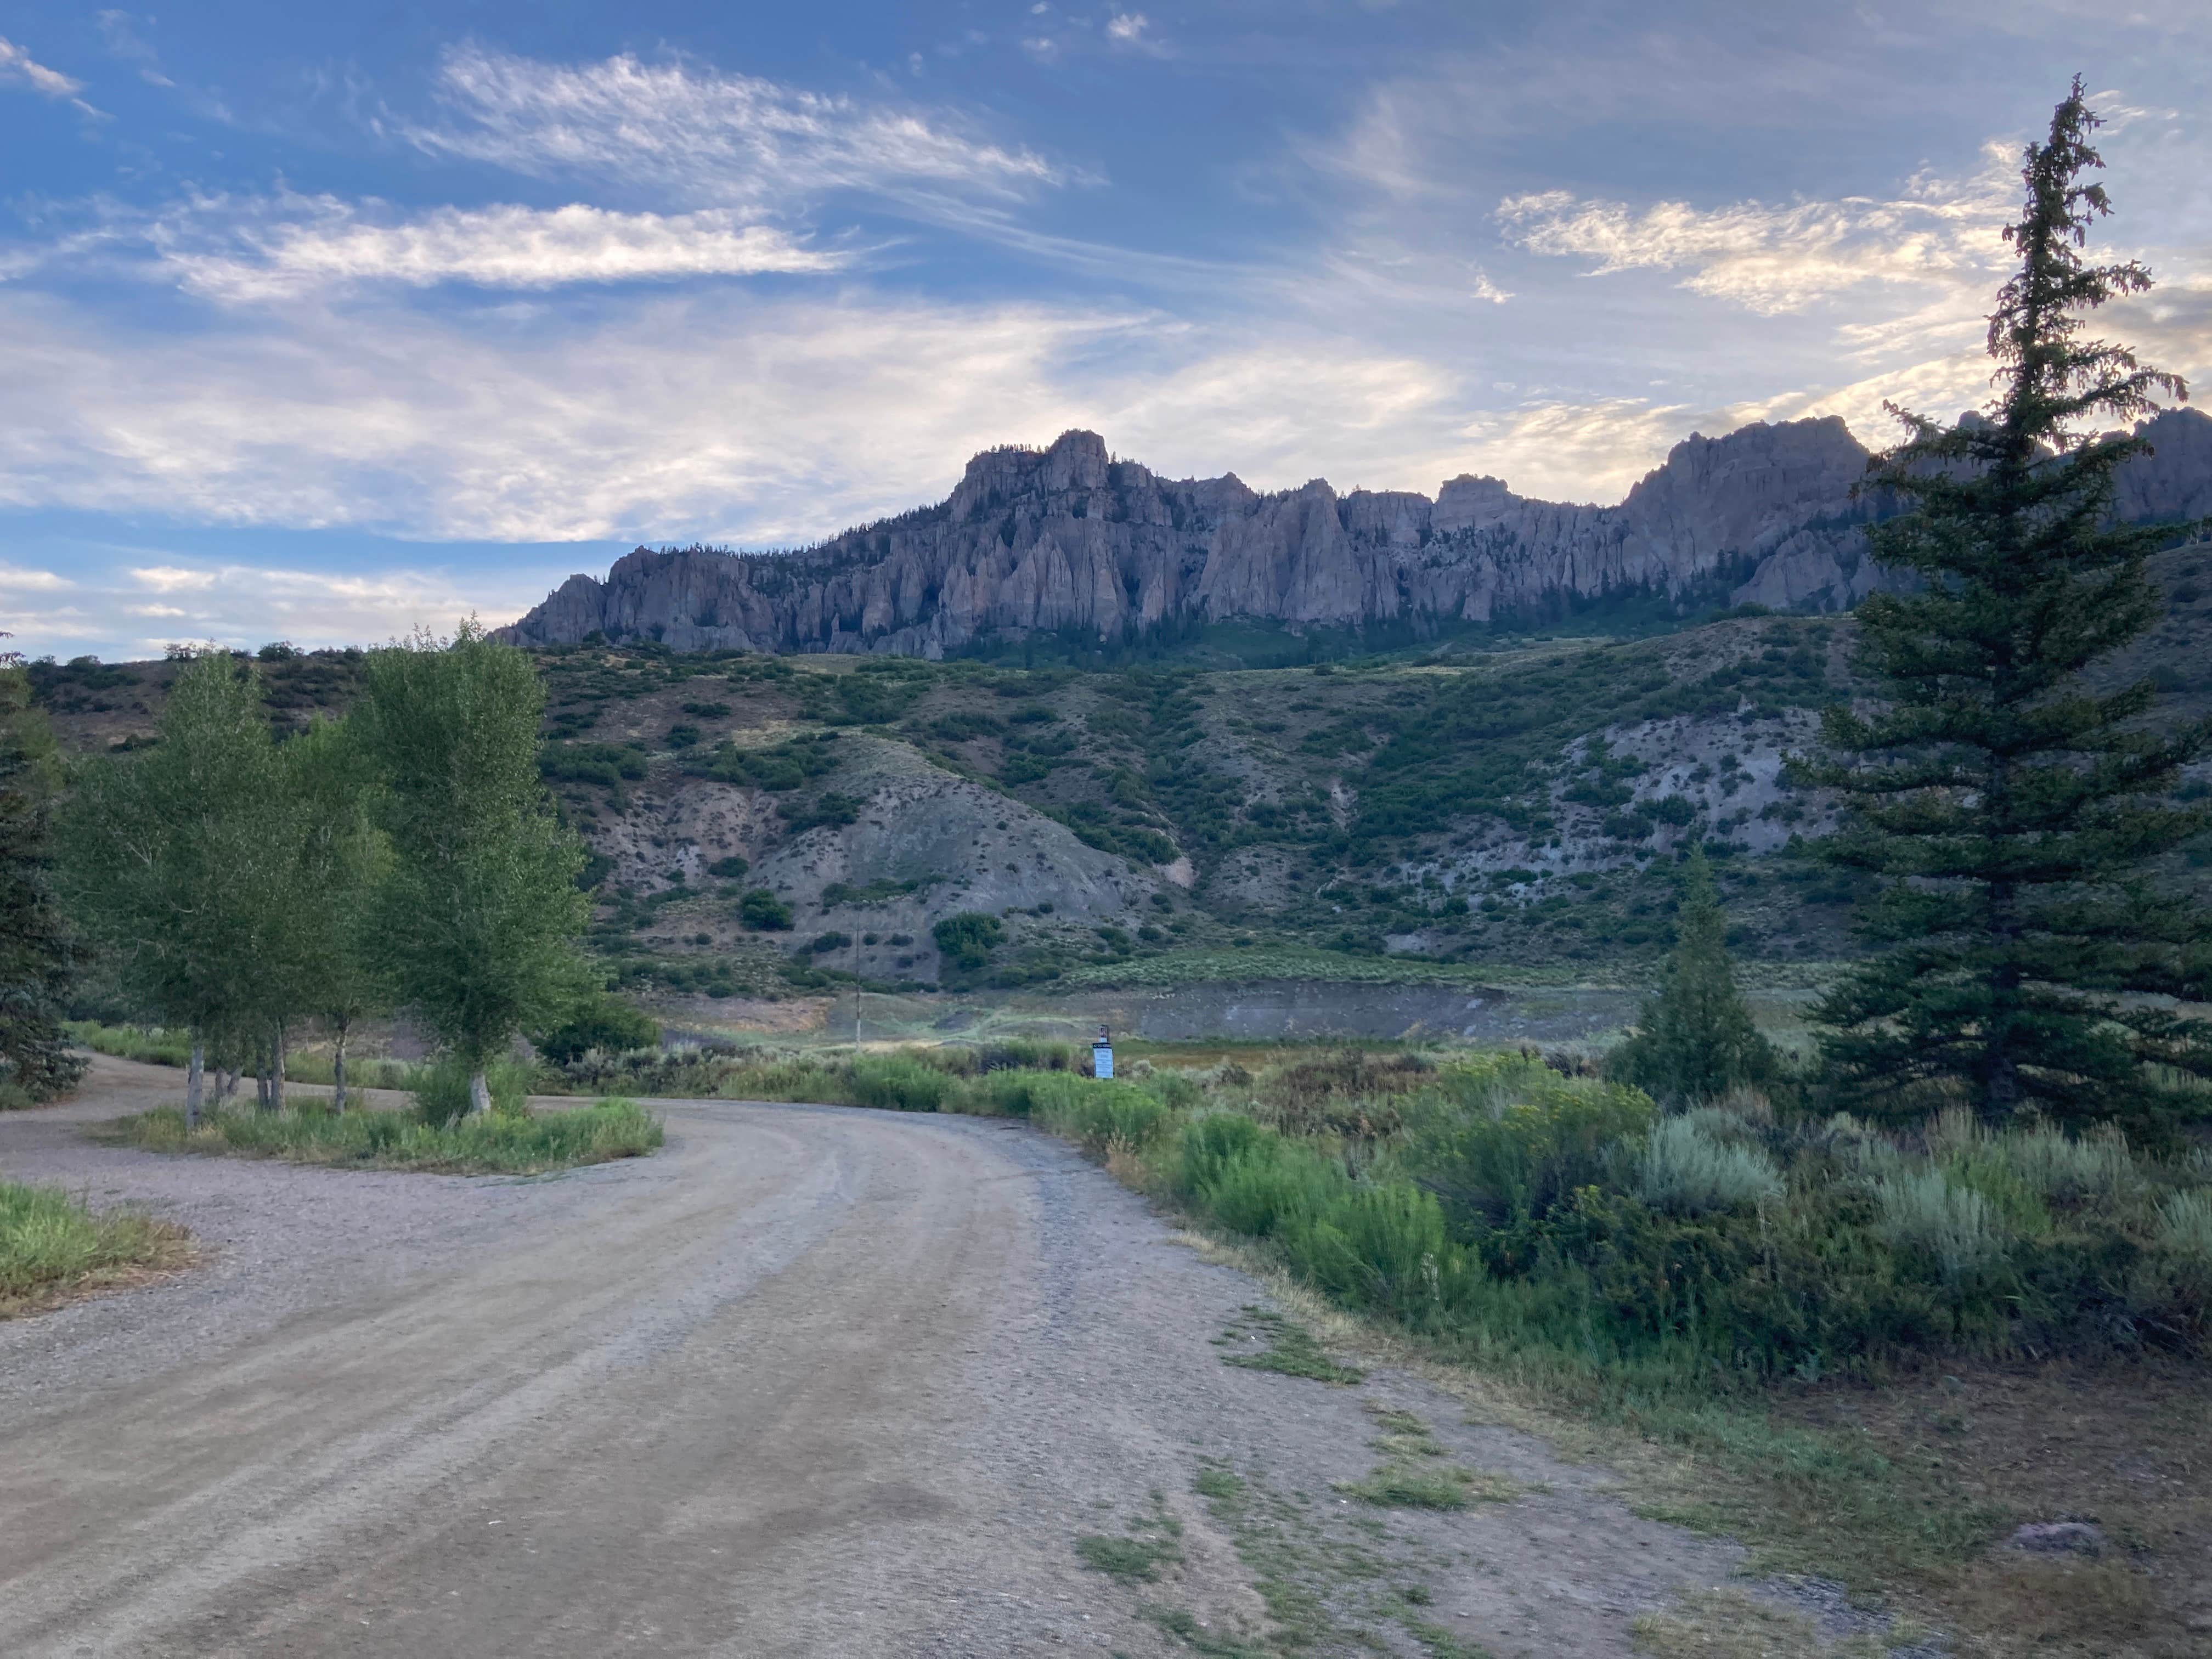 Camper submitted image from Ponderosa - Curecanti National Recreation Area - 4